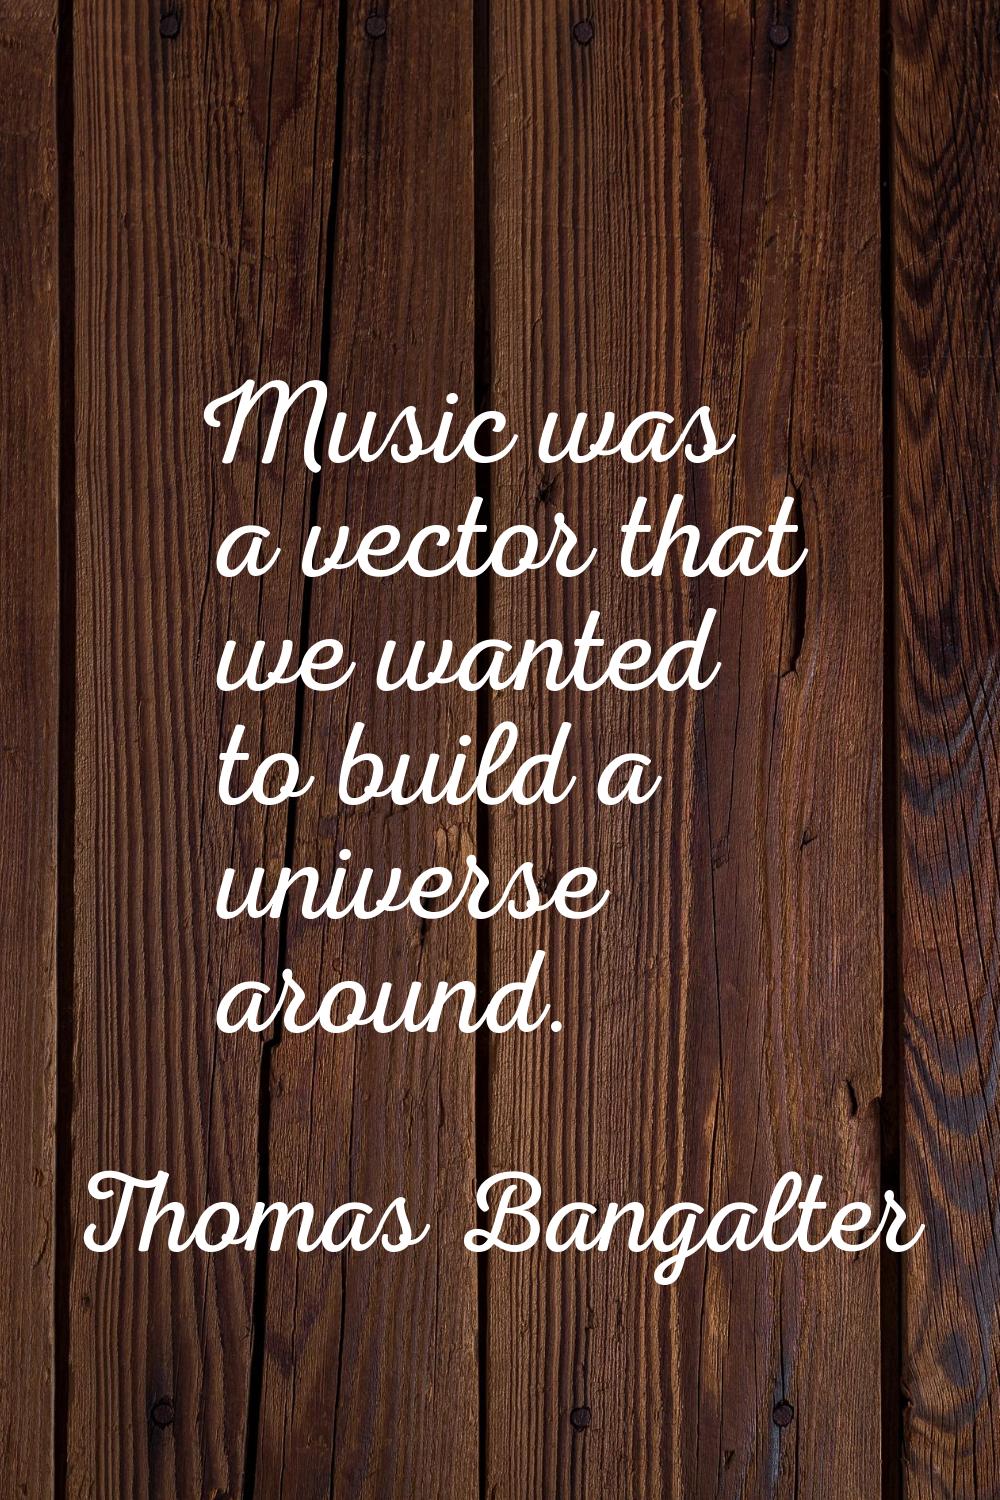 Music was a vector that we wanted to build a universe around.